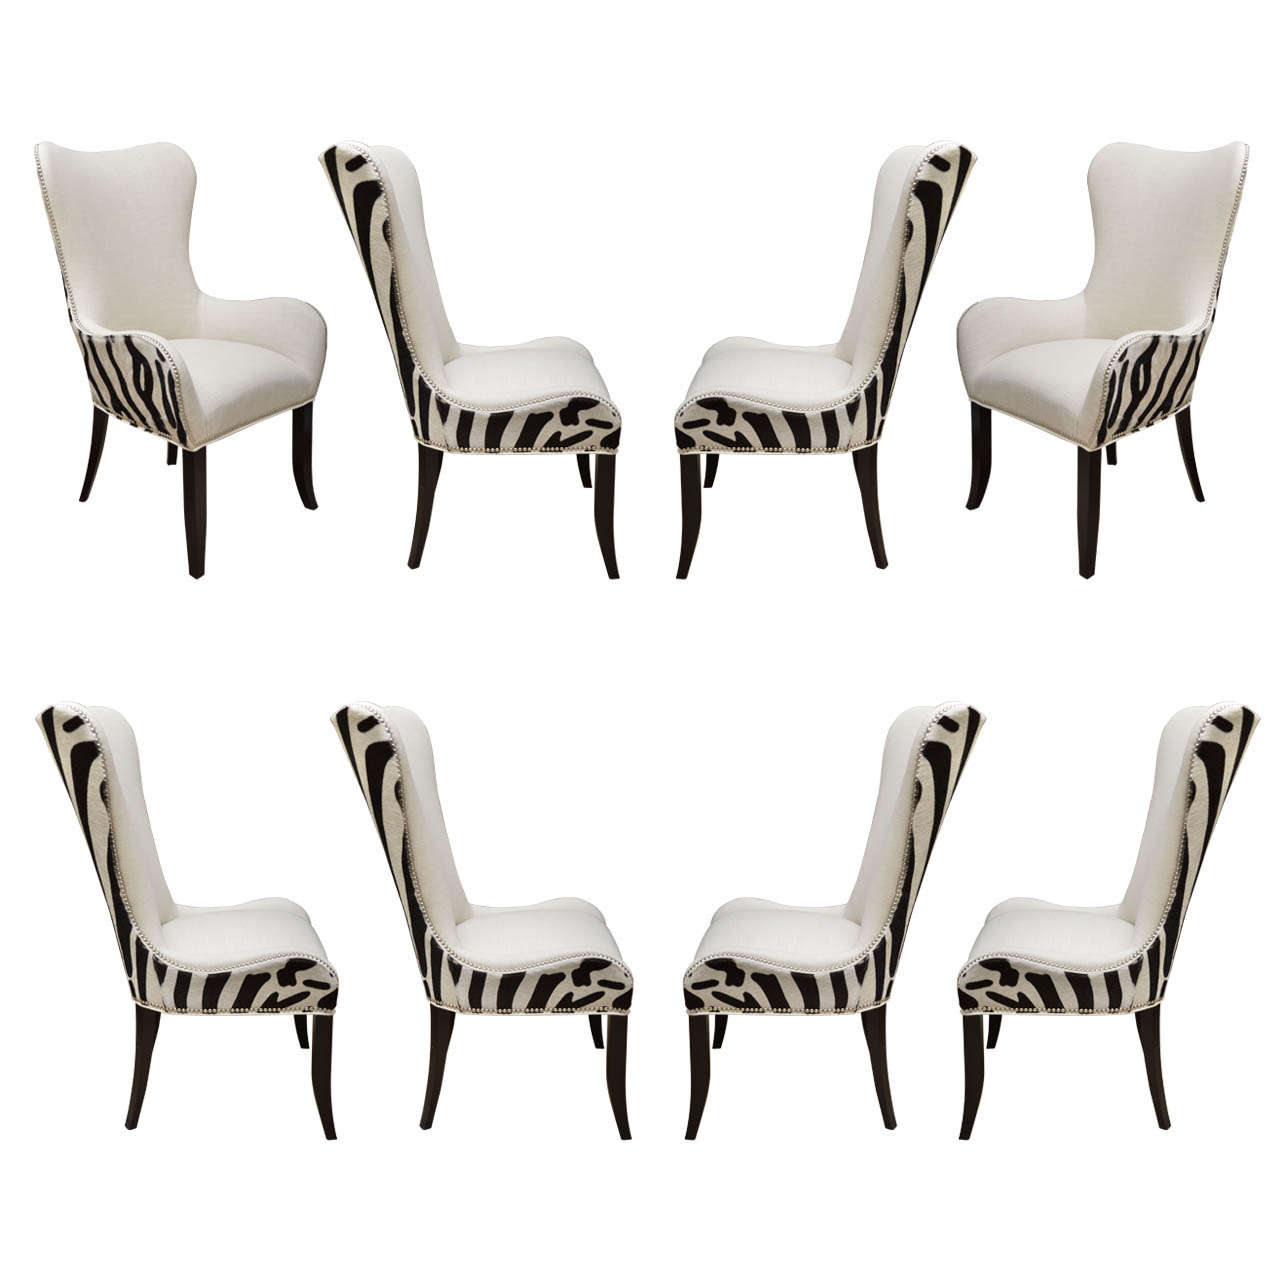 Set of Eight Zebra Stenciled Cowhide Dining Chairs For Sale